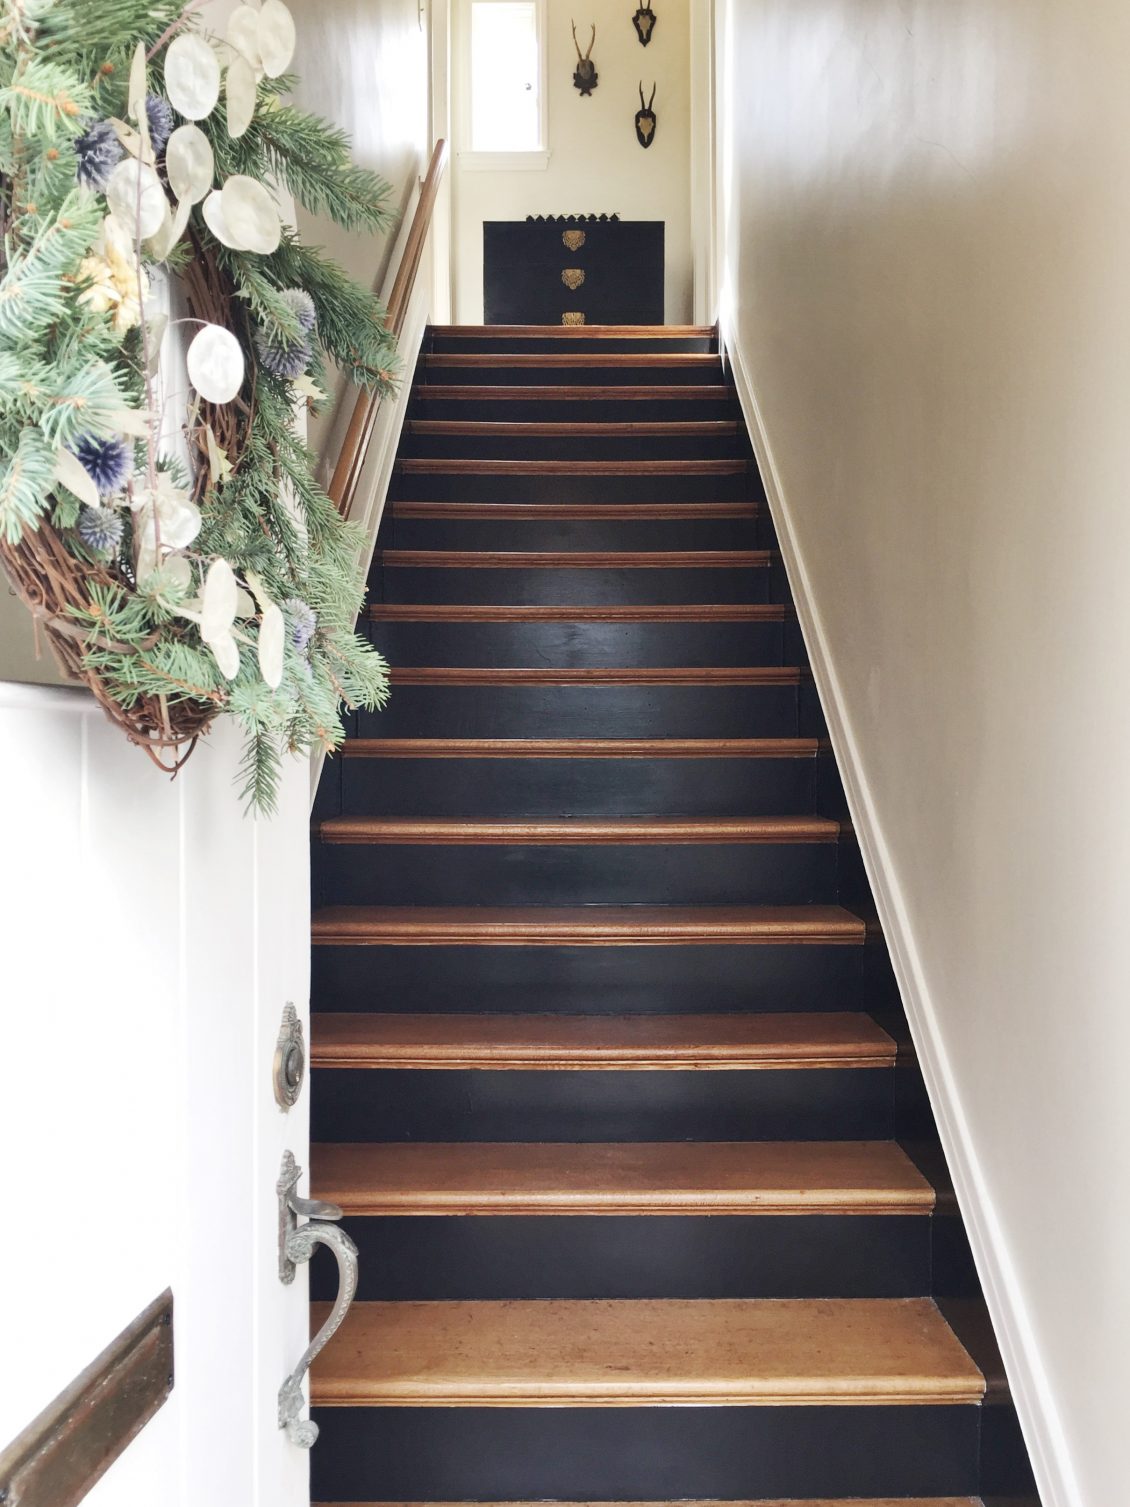 Home Sweet Deesign... Entryway Staircase With Farrow & Ball